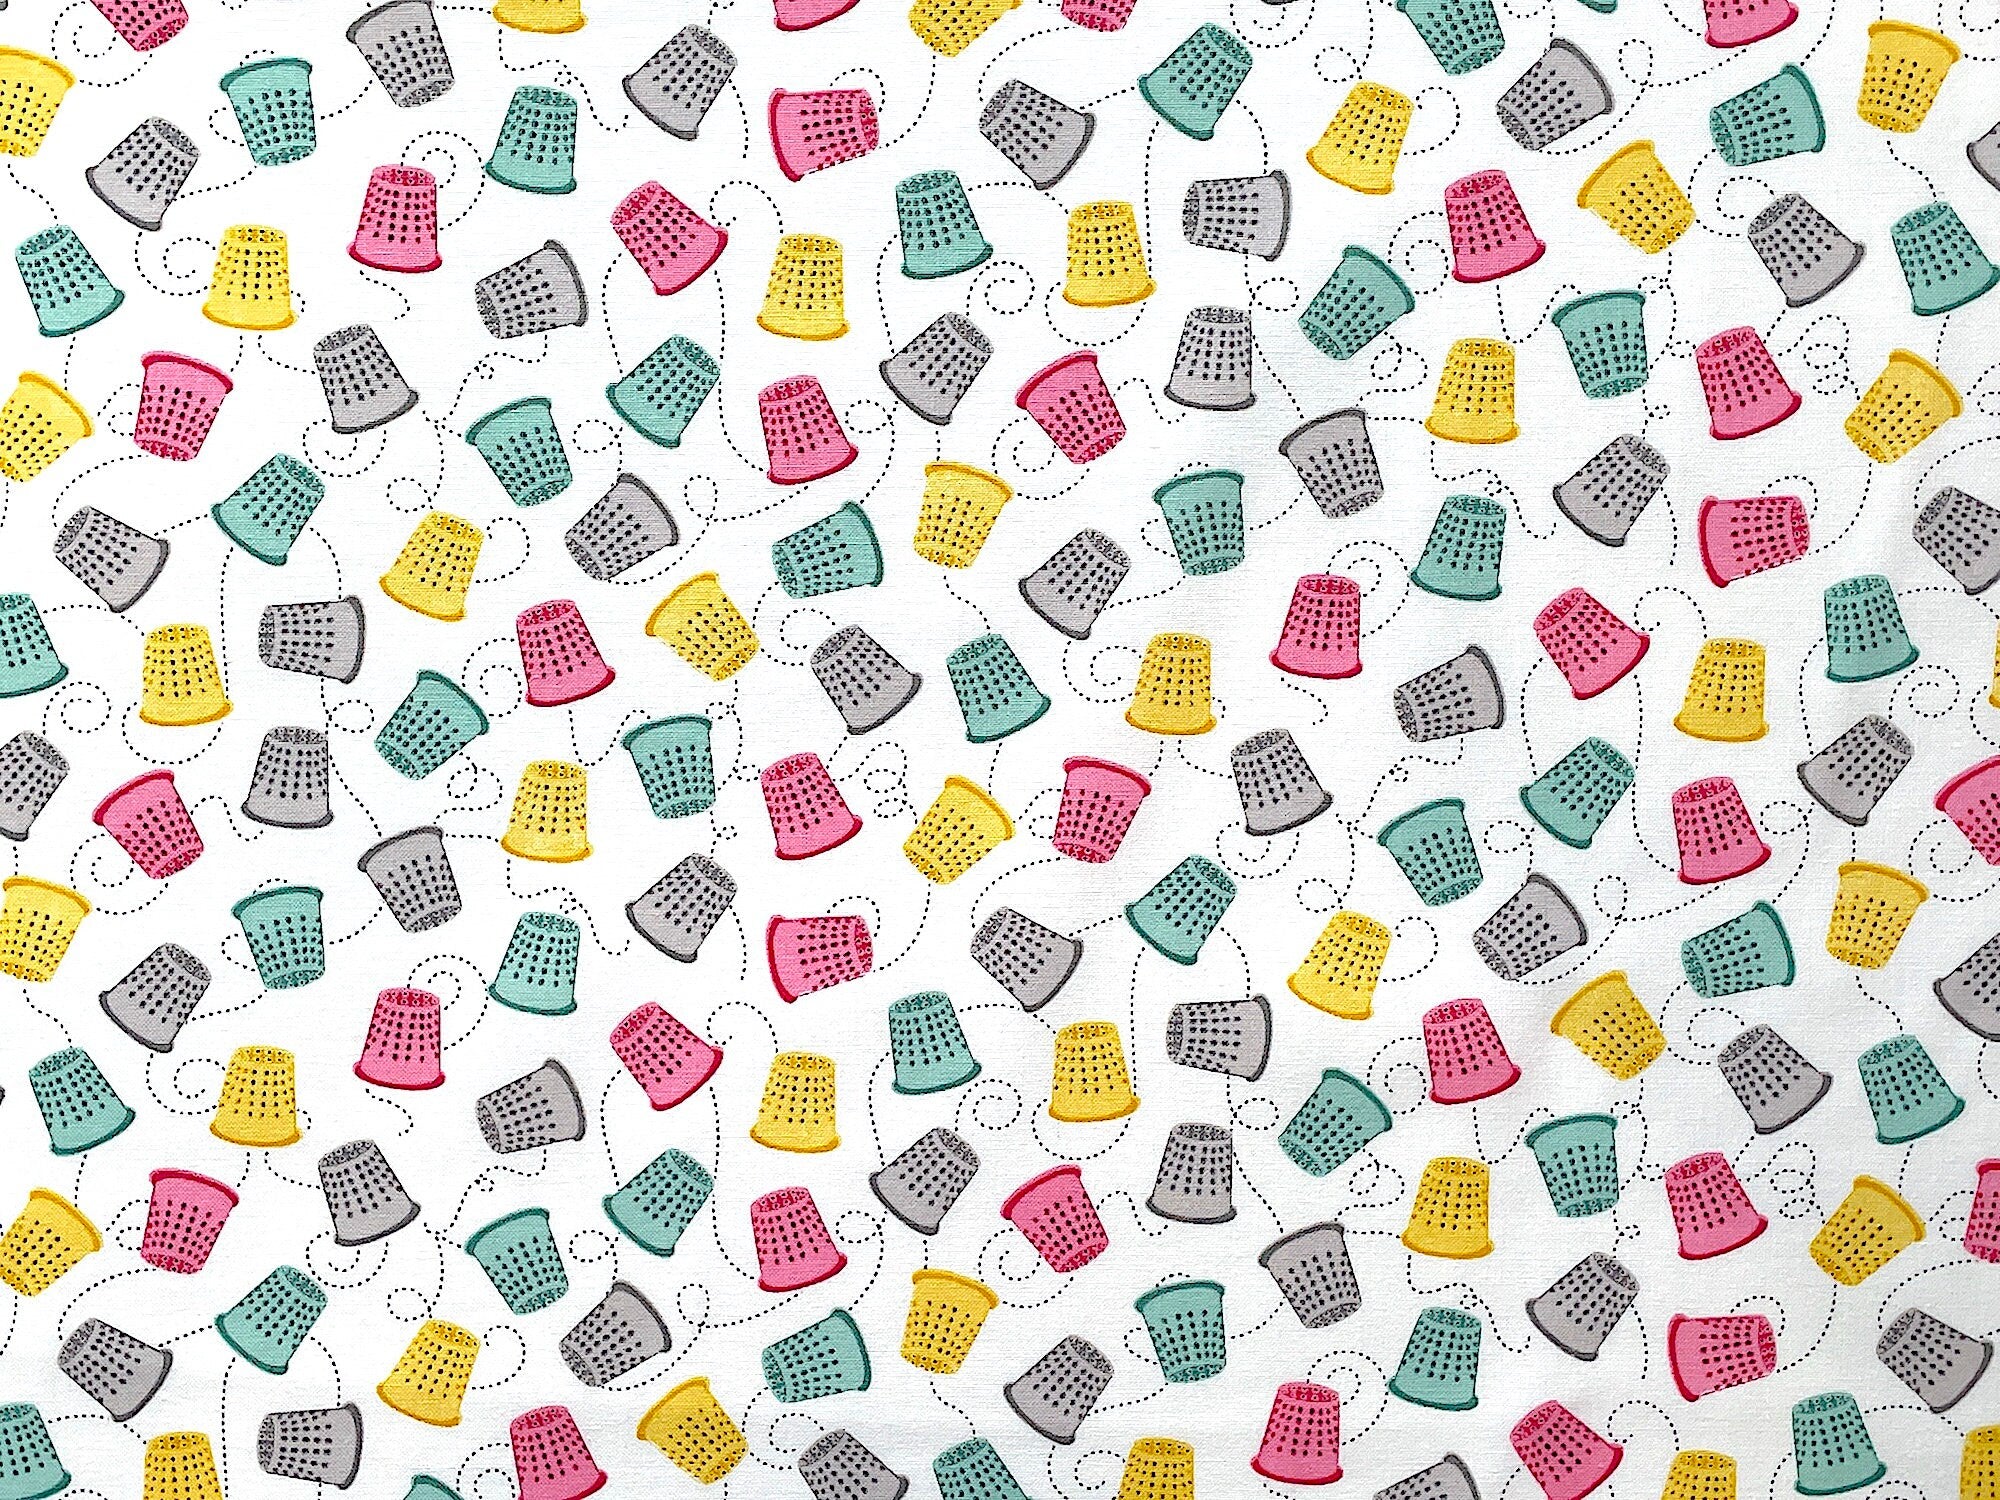 Green, yellow, pink and grey thimbles cover this white fabric. This fabric is part of the Words to Quilt by collection.